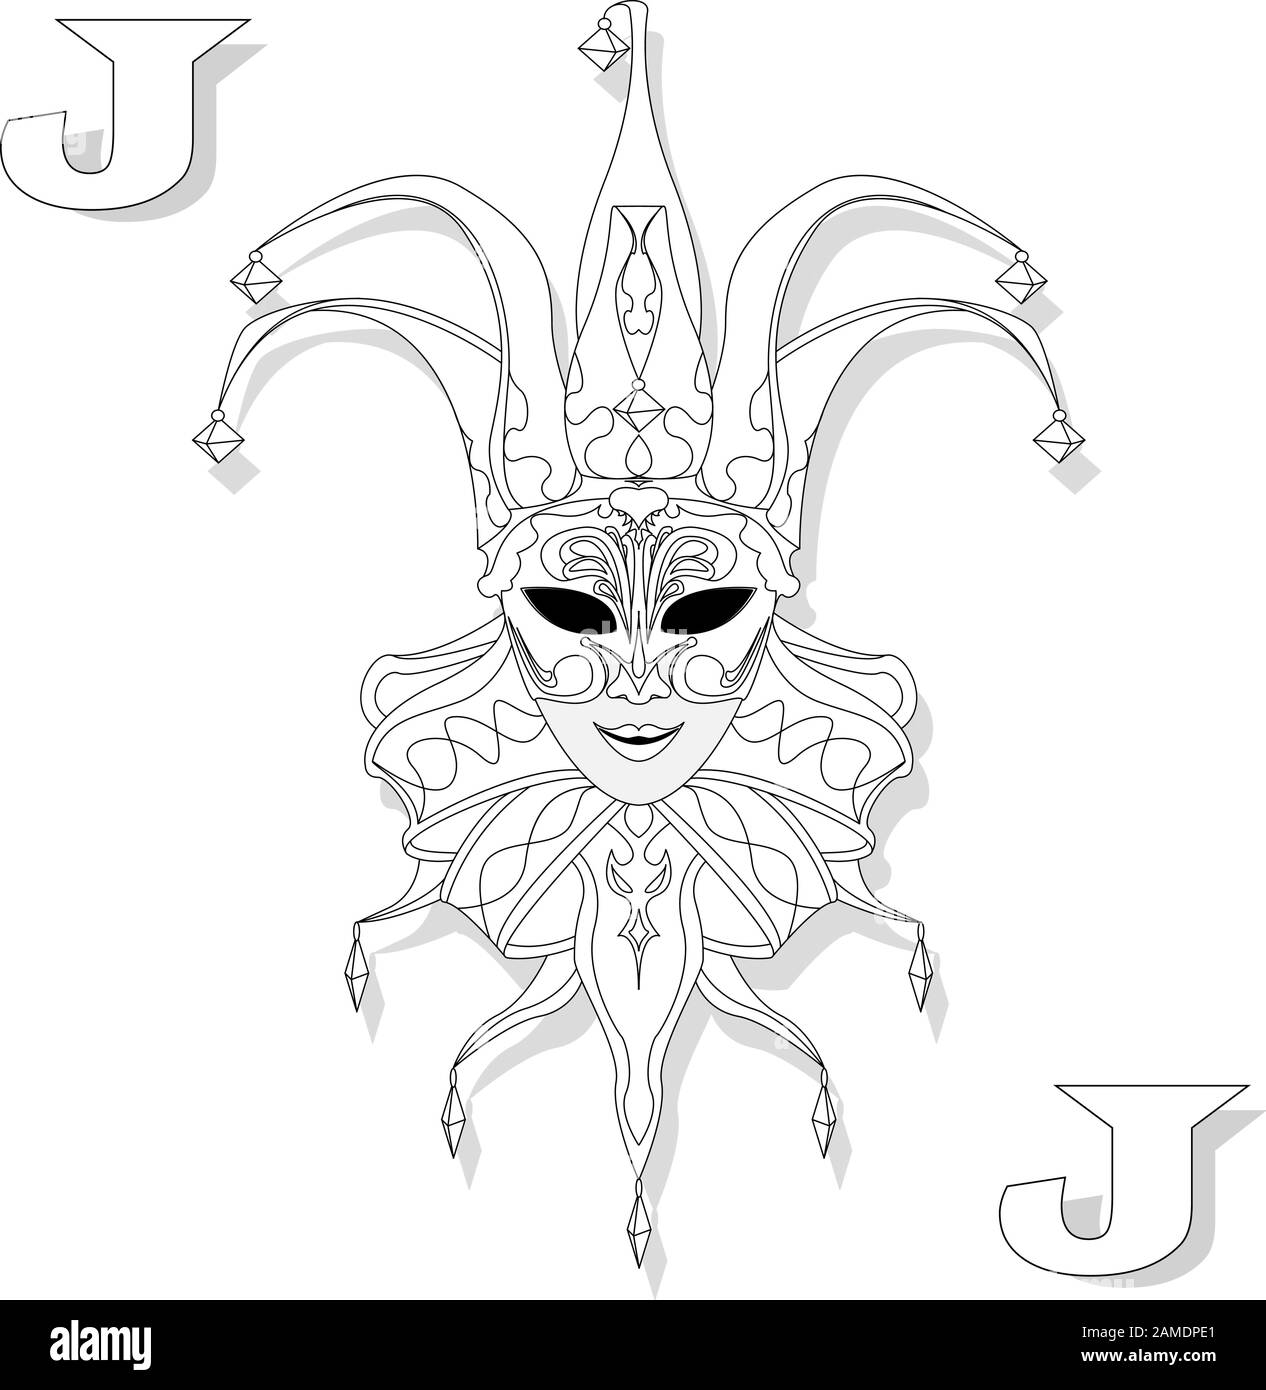 Face mask joker style. Isolated vector illustration on white background. Coloring adult page. Stock Vector